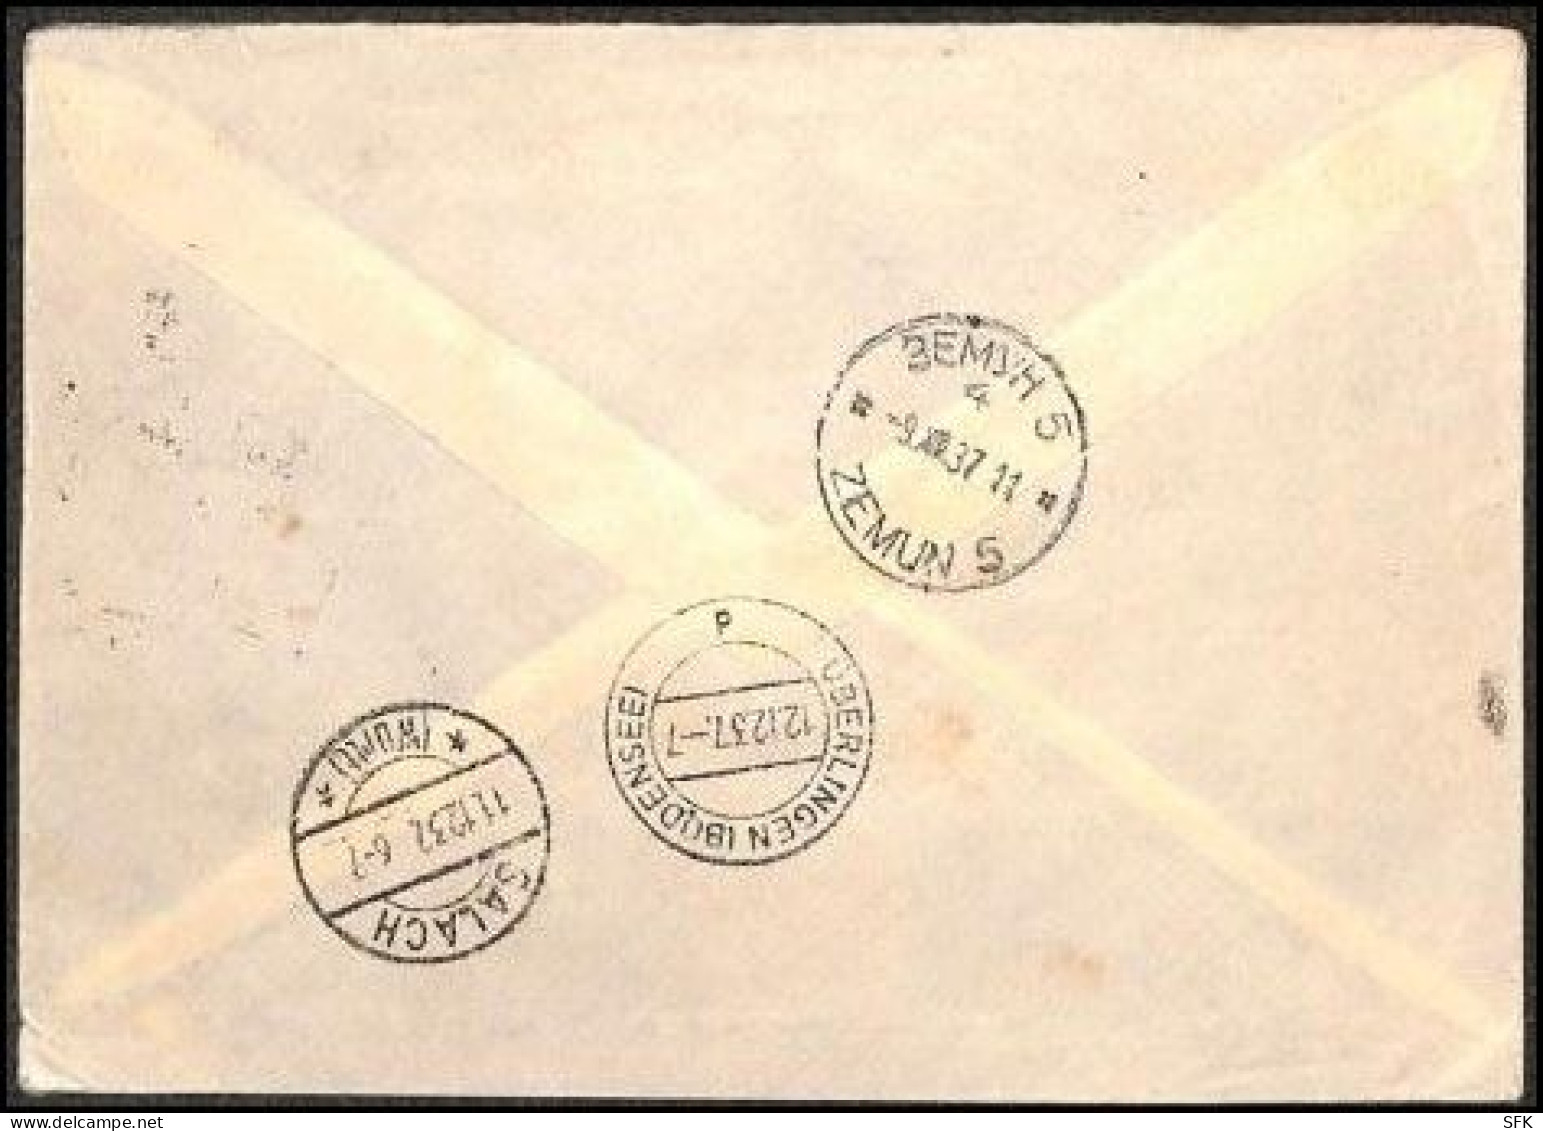 1937 Airmail Letter From Belgrade Airport Zemun 5 To Wirnterberg Sent By Lufthansa With Appropriate Franking, VF - Luchtpost